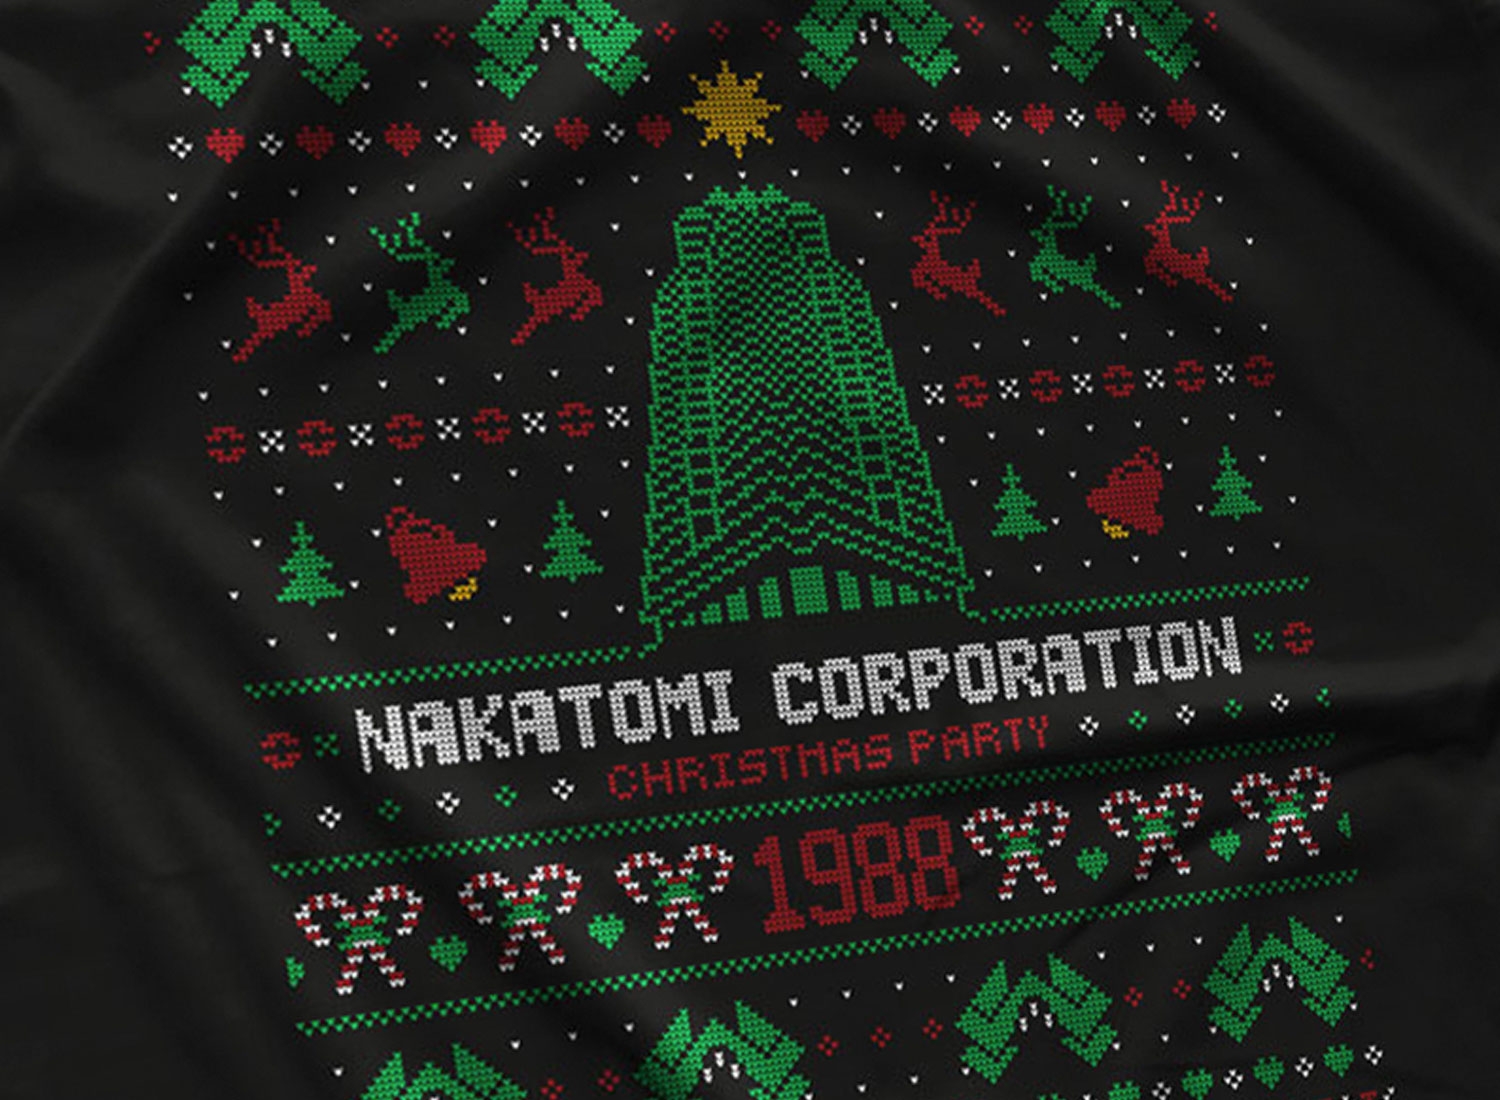 Die Hard Welcome to The Party Pal,Xmas Festive Gift Jumper Top Merry Christmas Party Nakatomi Corporation 1988 Jumper 